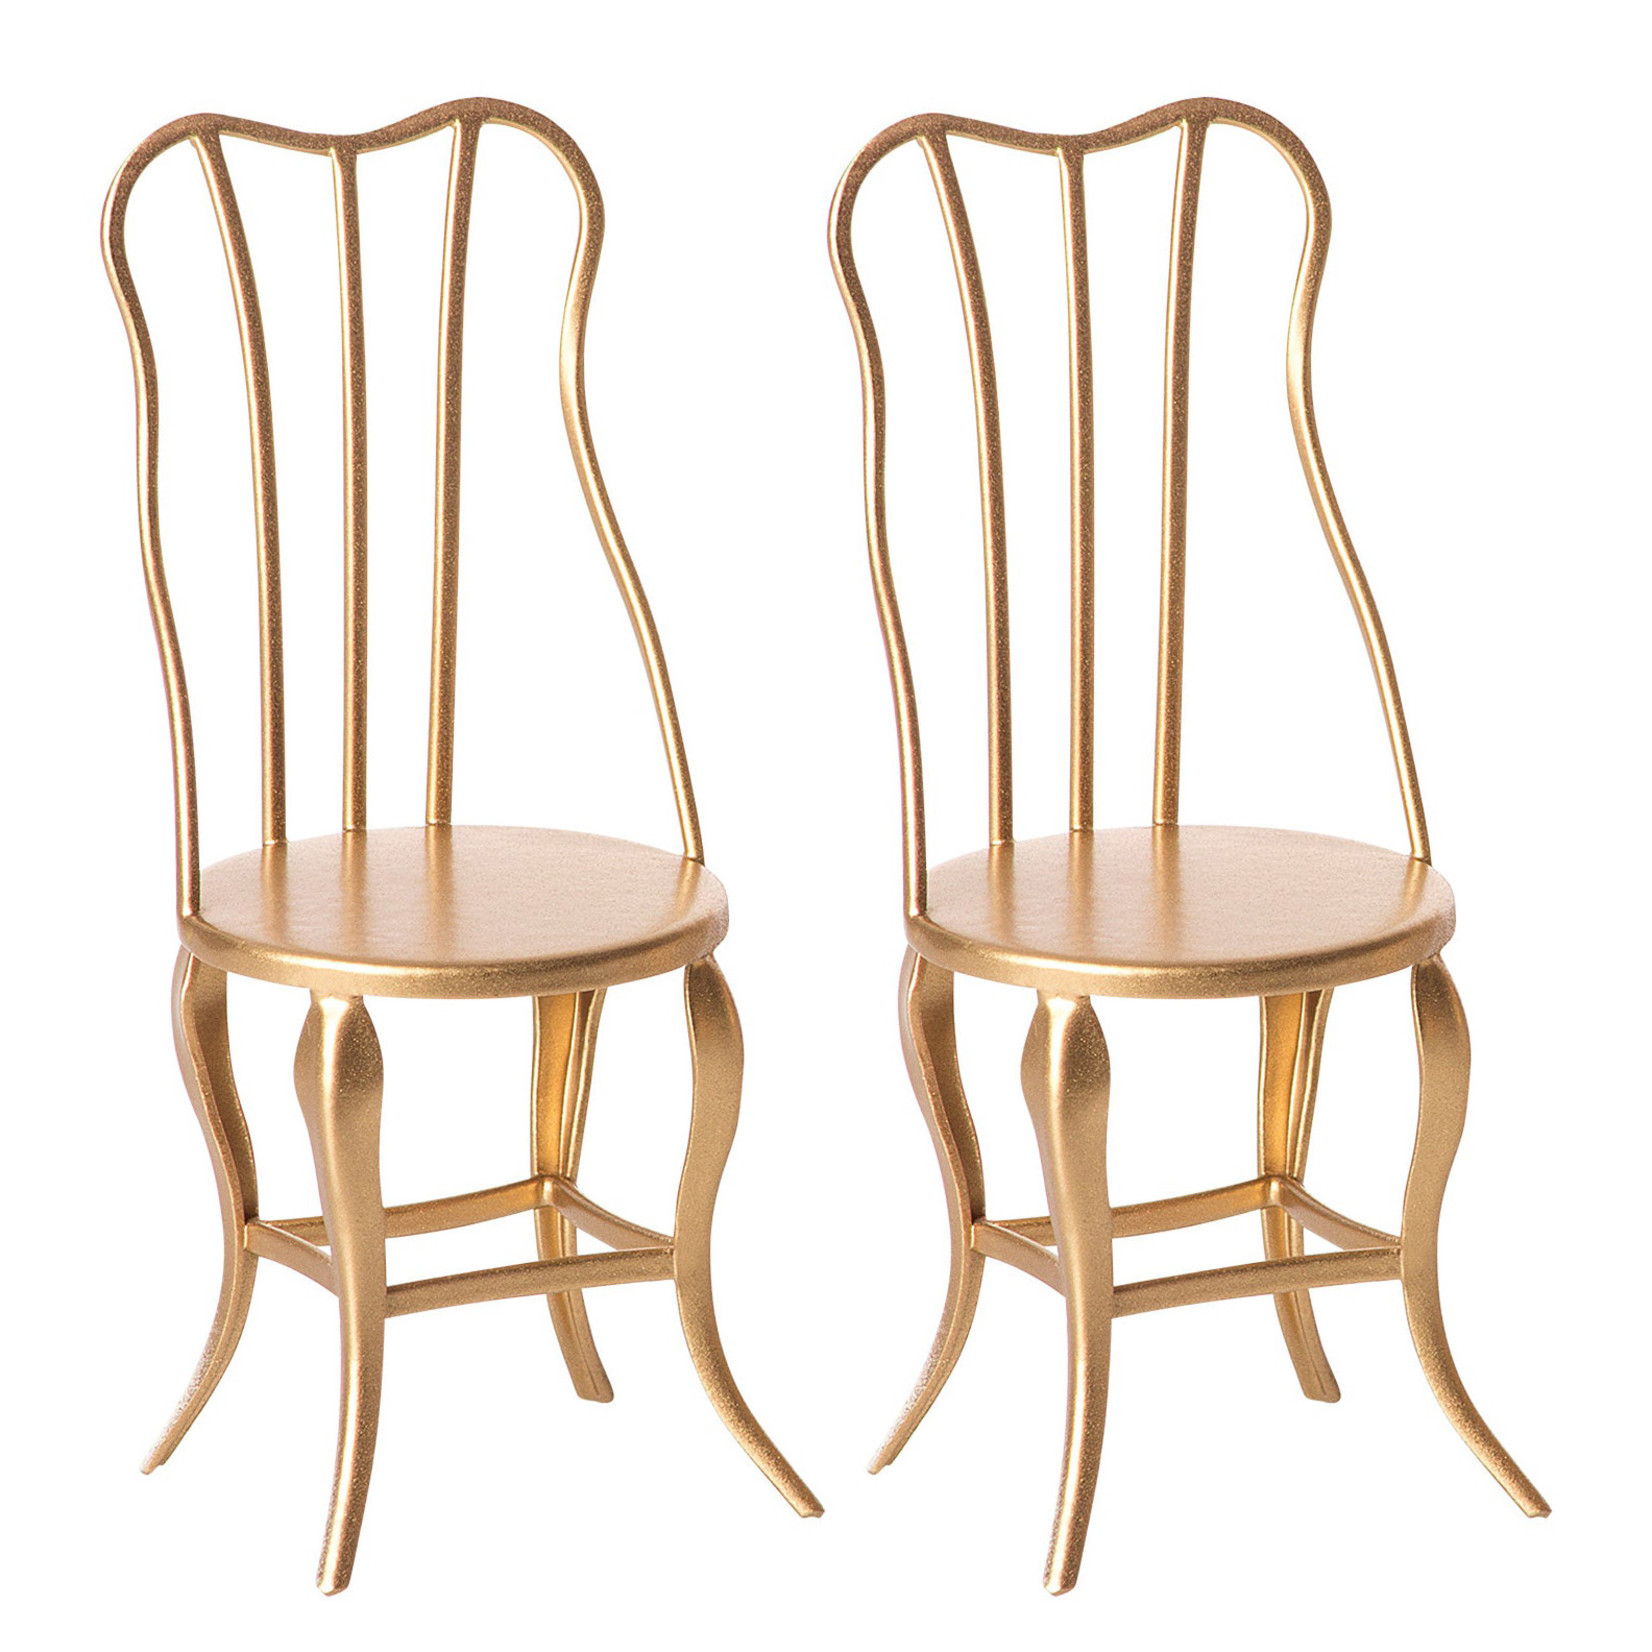 Maileg USA Vintage Chair, Micro - Gold, 2 Pack